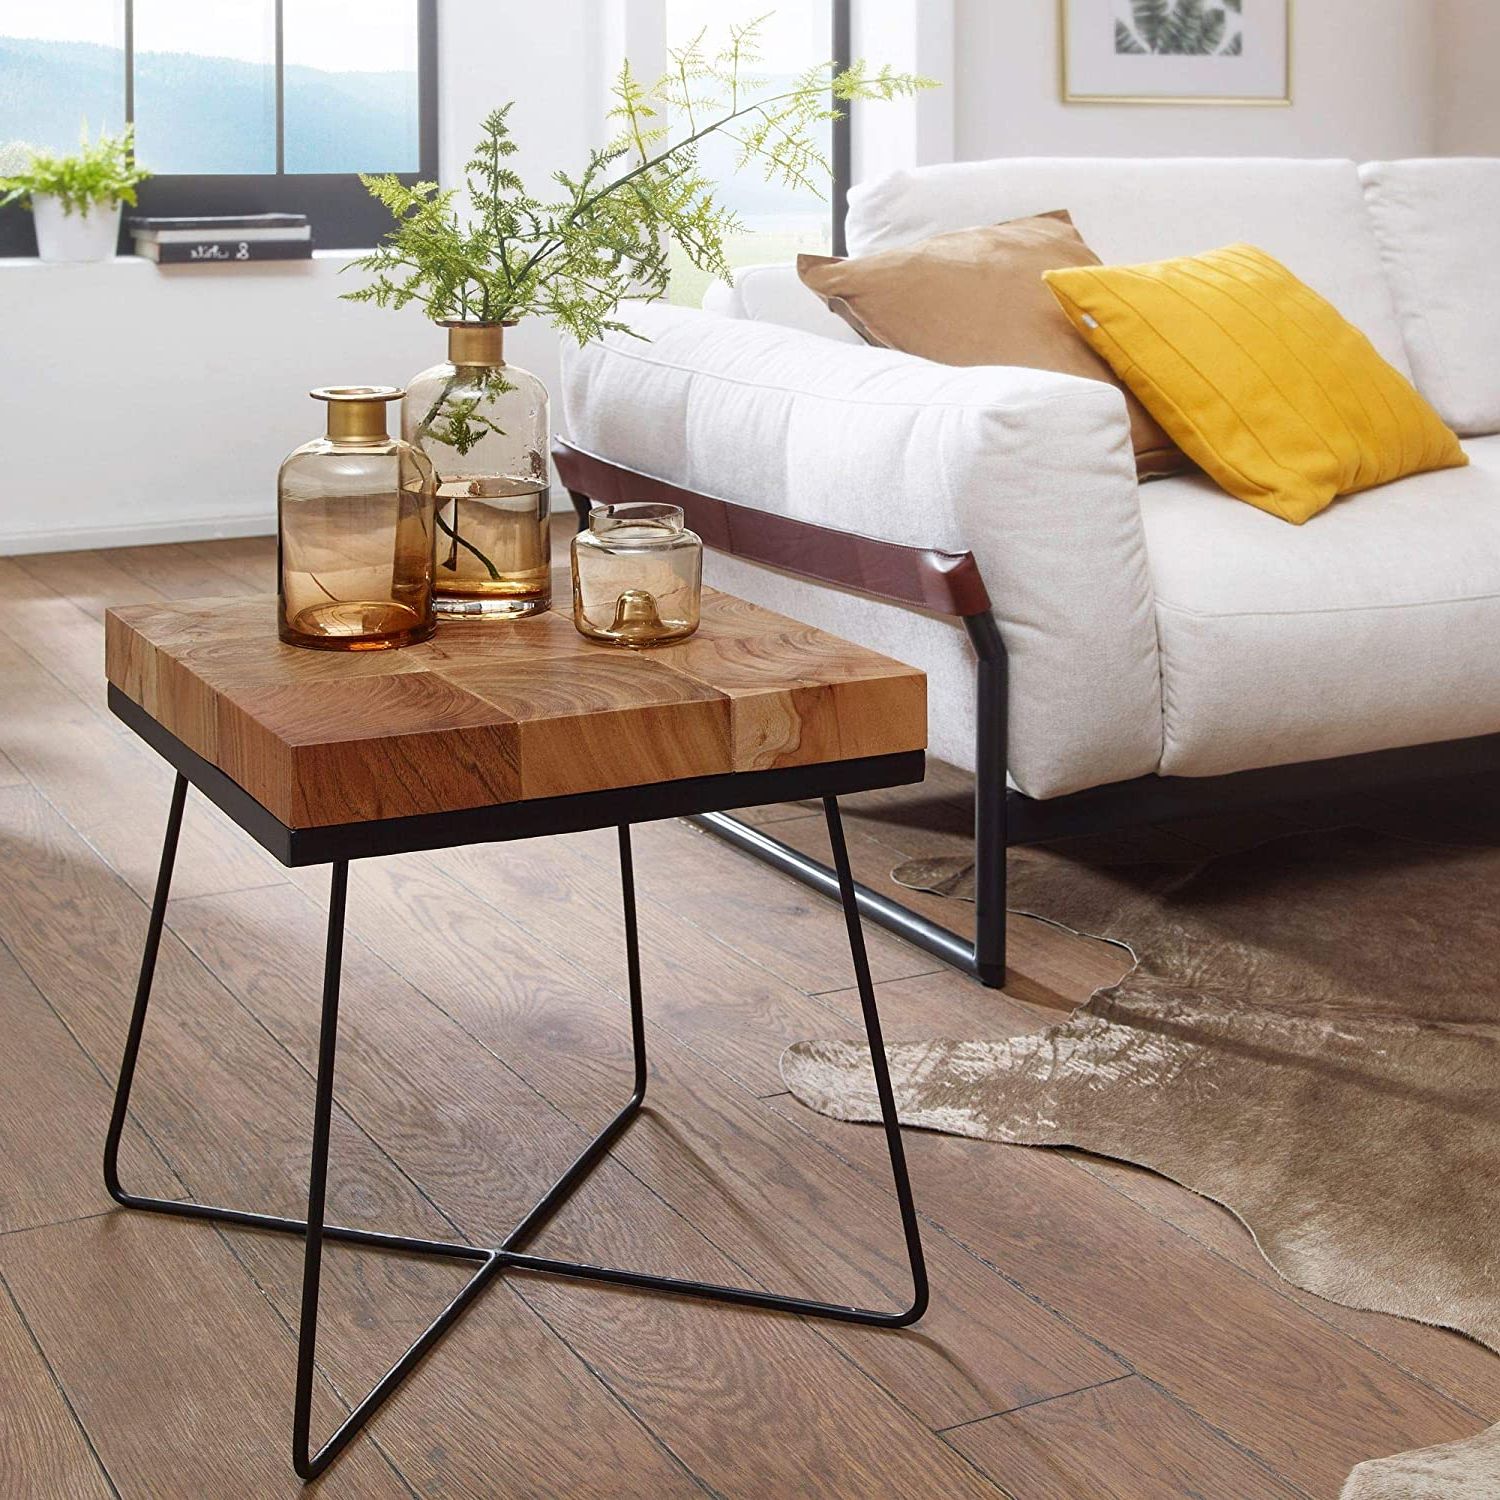 Coffee Tables With Metal Legs For Most Current Heather Wood Side Table With Metal Legs – Decornation (View 10 of 10)